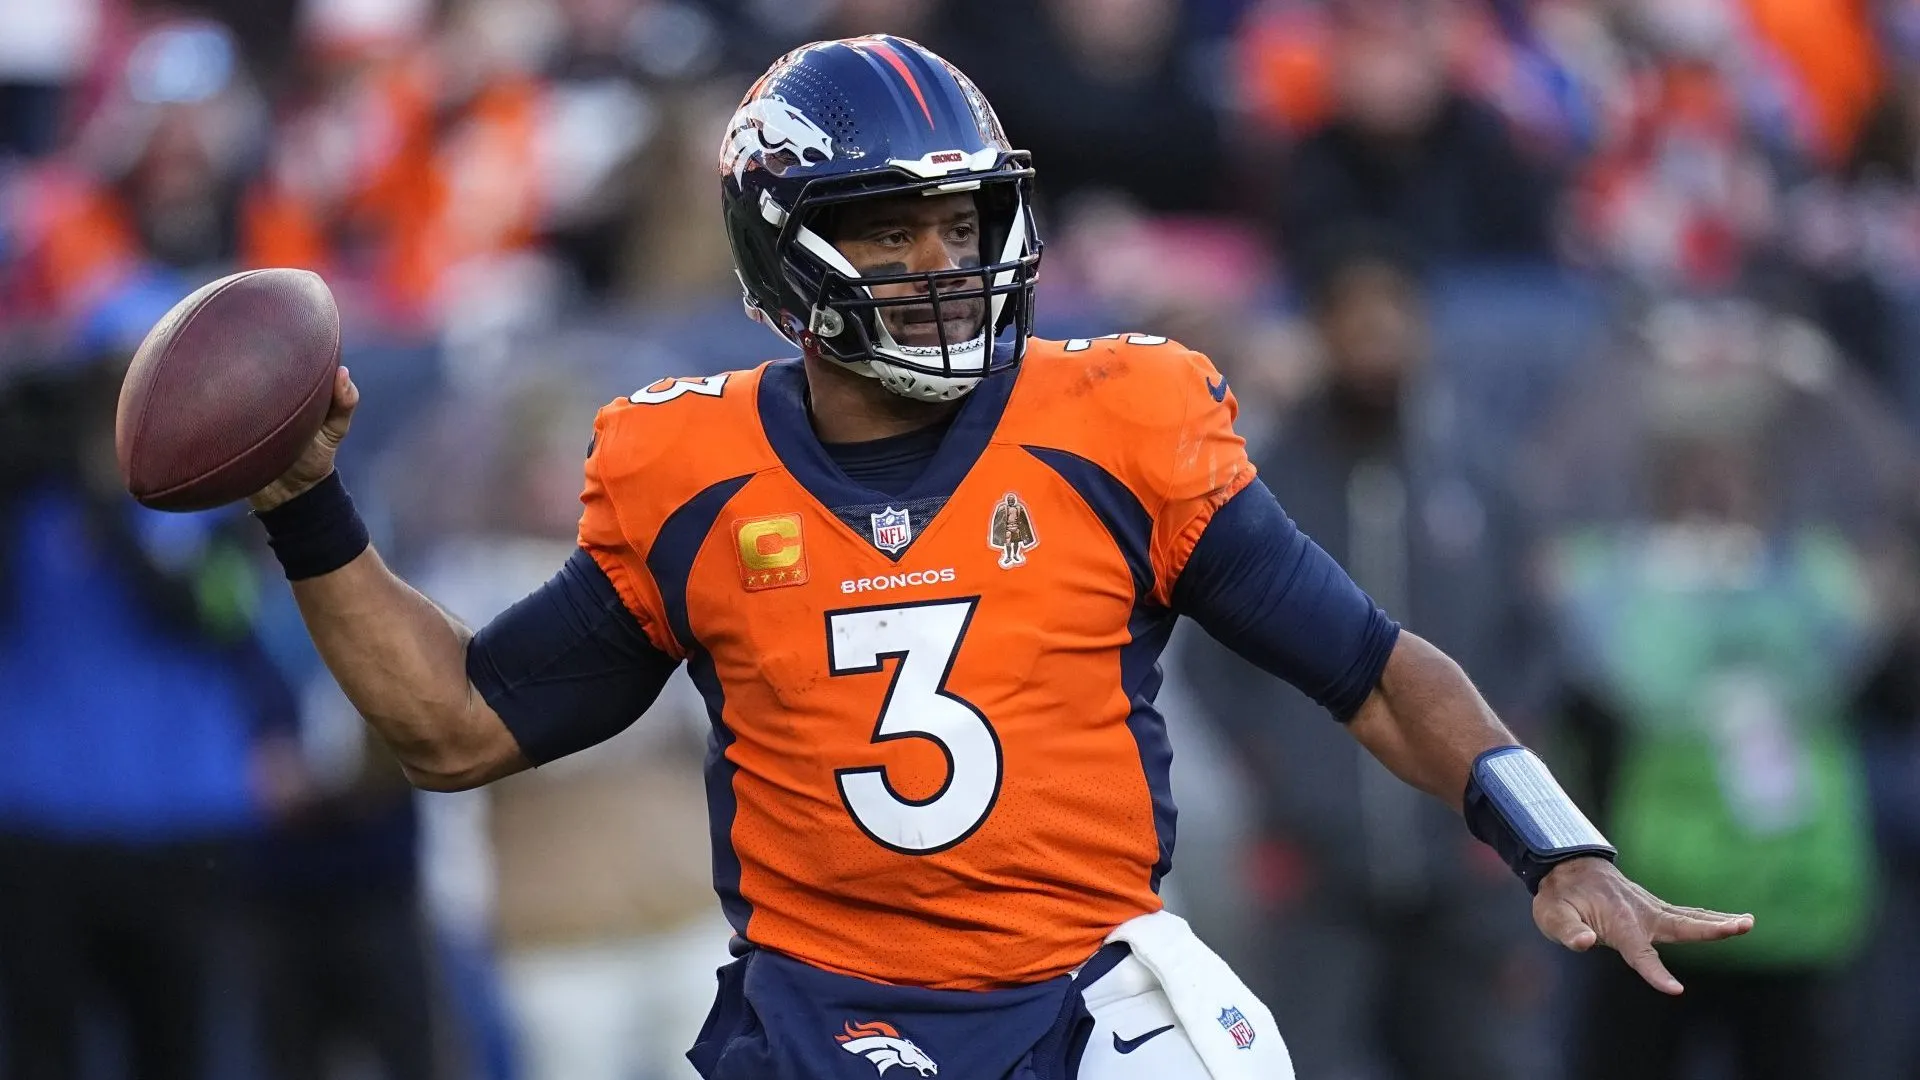 Broncos at a Crossroads: Will They Gamble on a New QB or Play It Safe in the Draft?